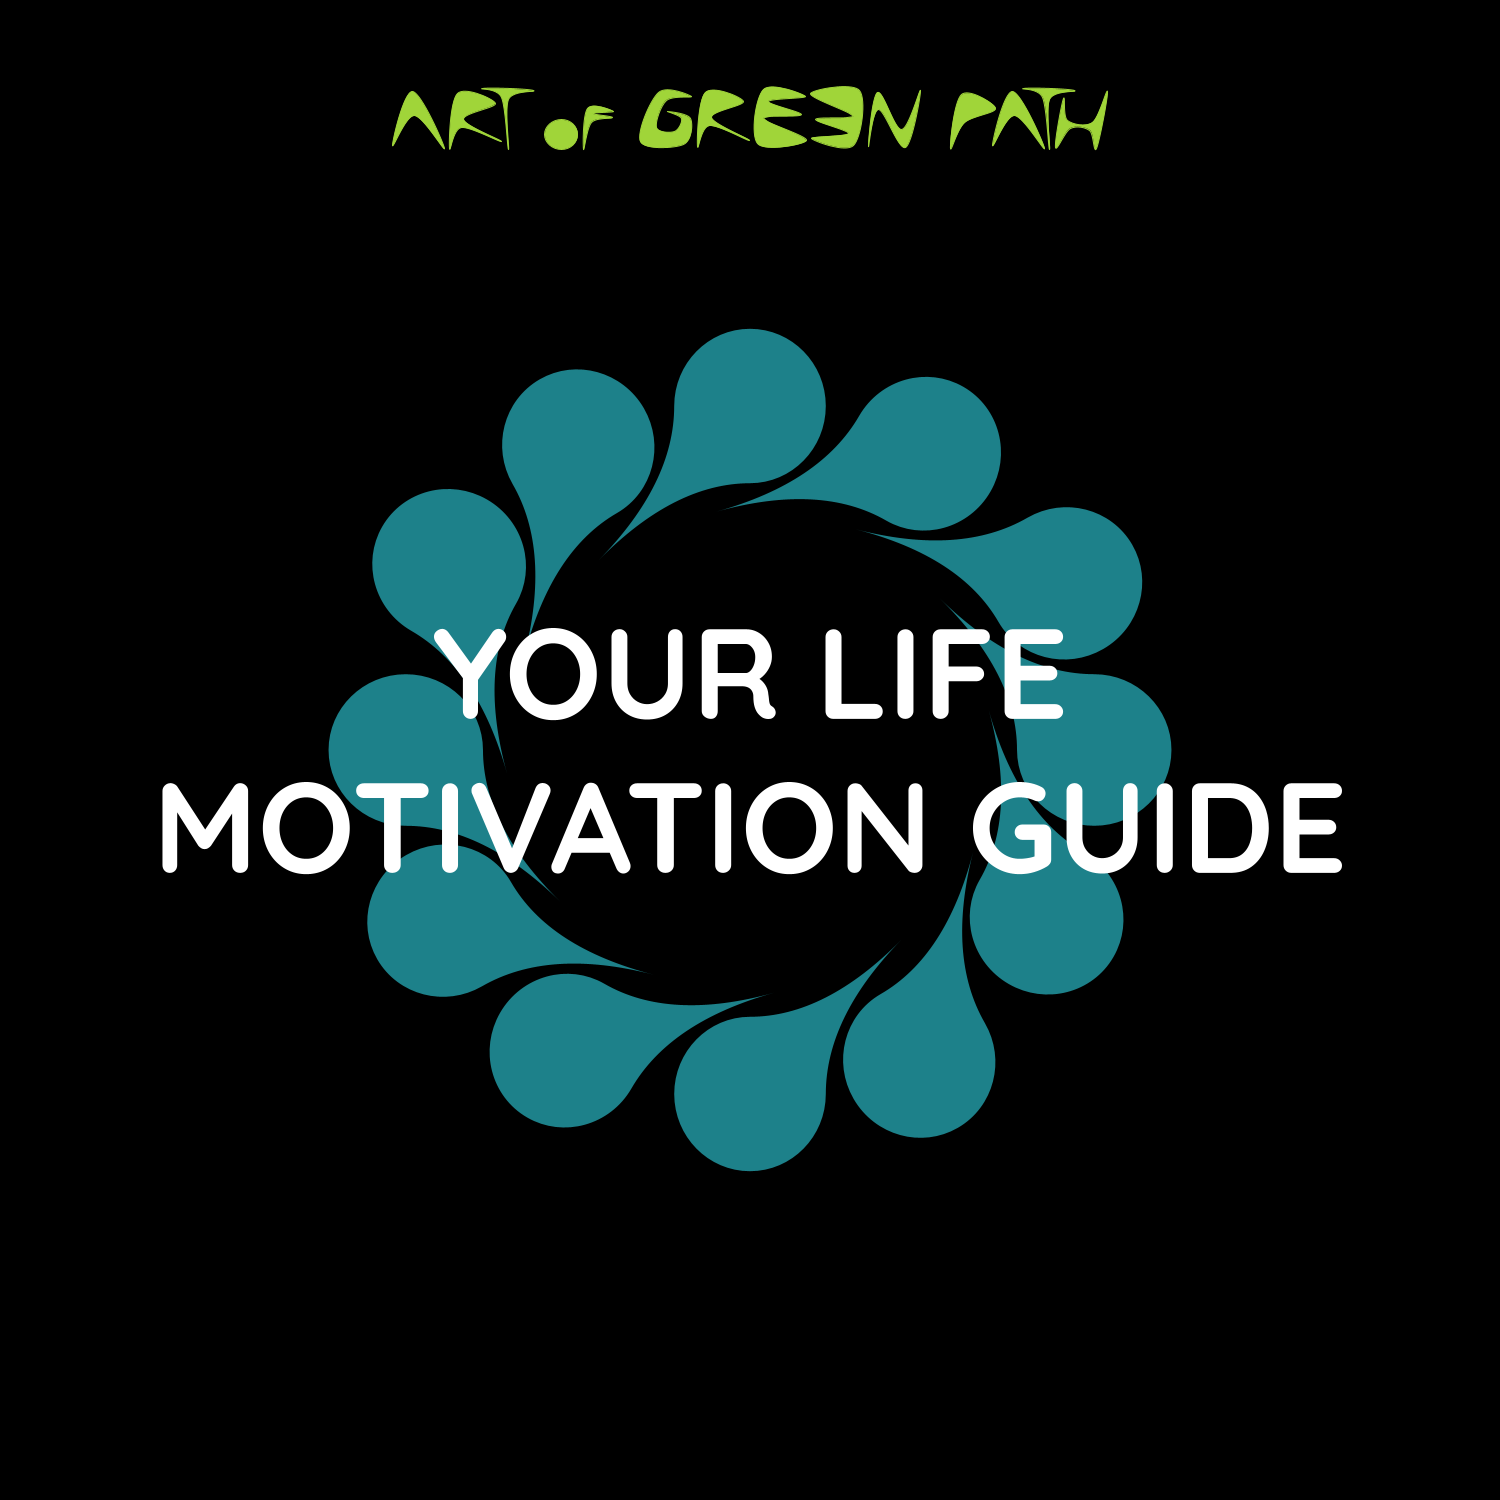 YOUR LIFE MOTIVATION GUIDE by Art Of Green Path